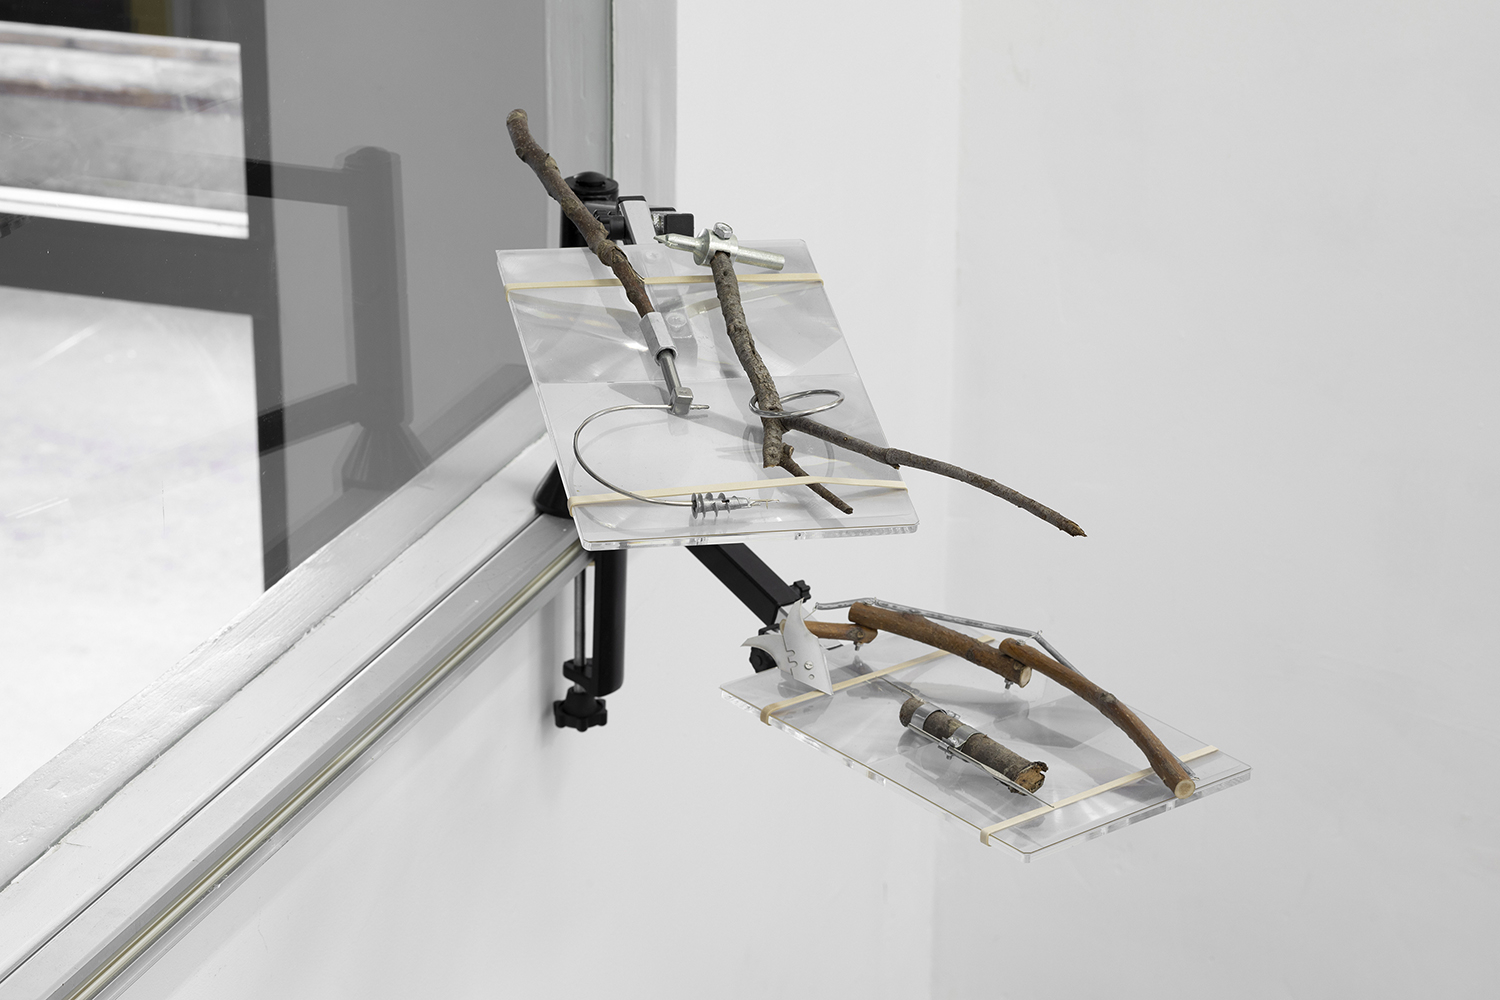 Lee Nevo, The Unofficial Office for Removal of Rebellious Moral Issues, 2014. Adjustable monitor arm, magnifying sheets, metal parts, rubber bands, wood, variable dimensions